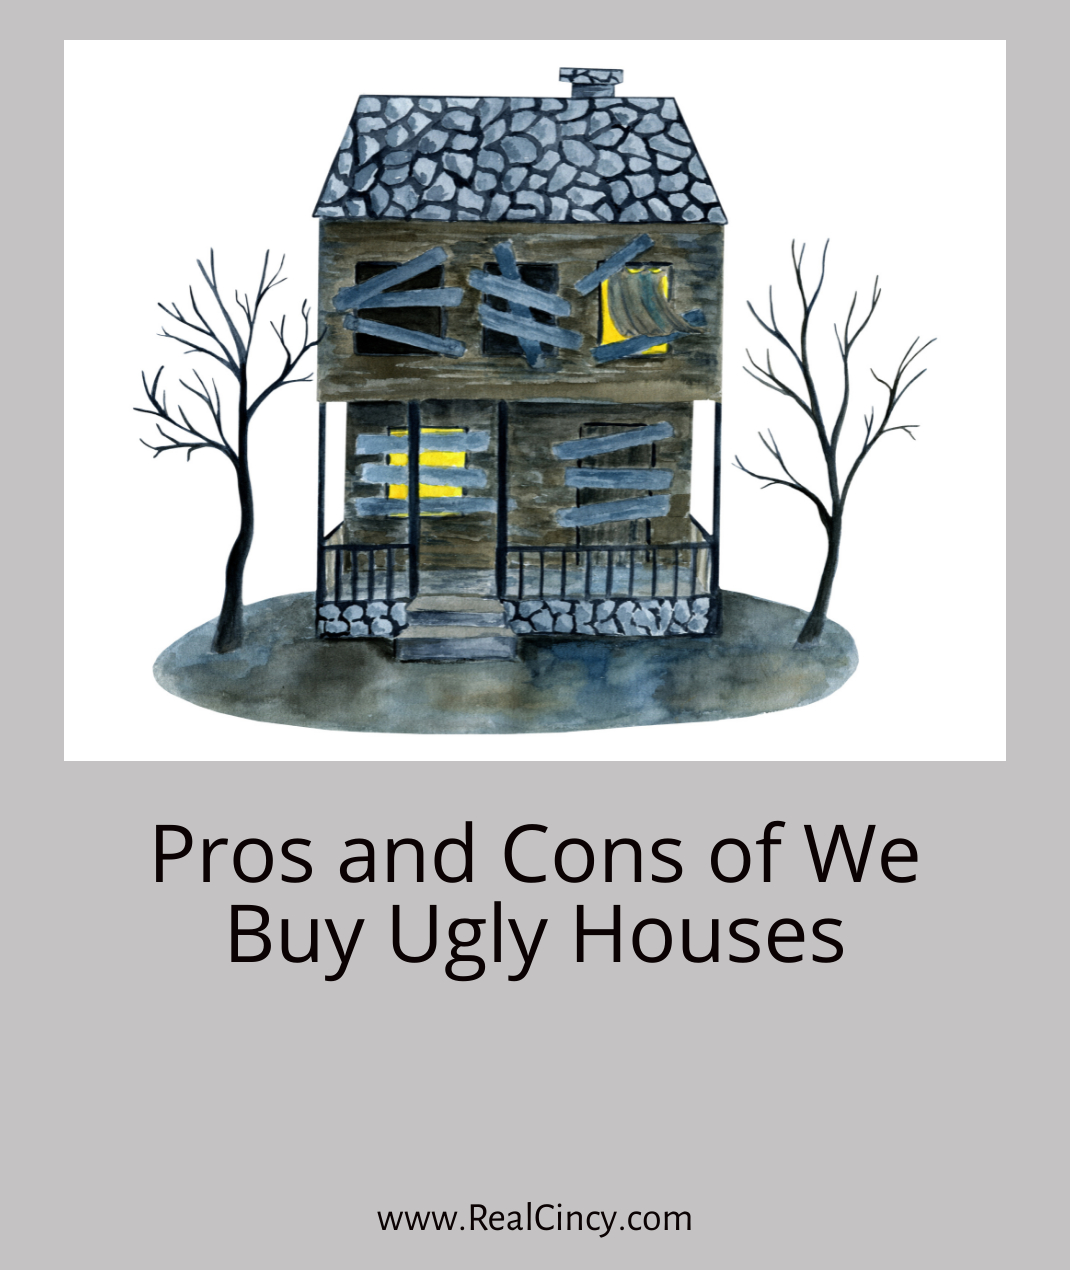 Pros and Cons of We Buy Ugly Houses